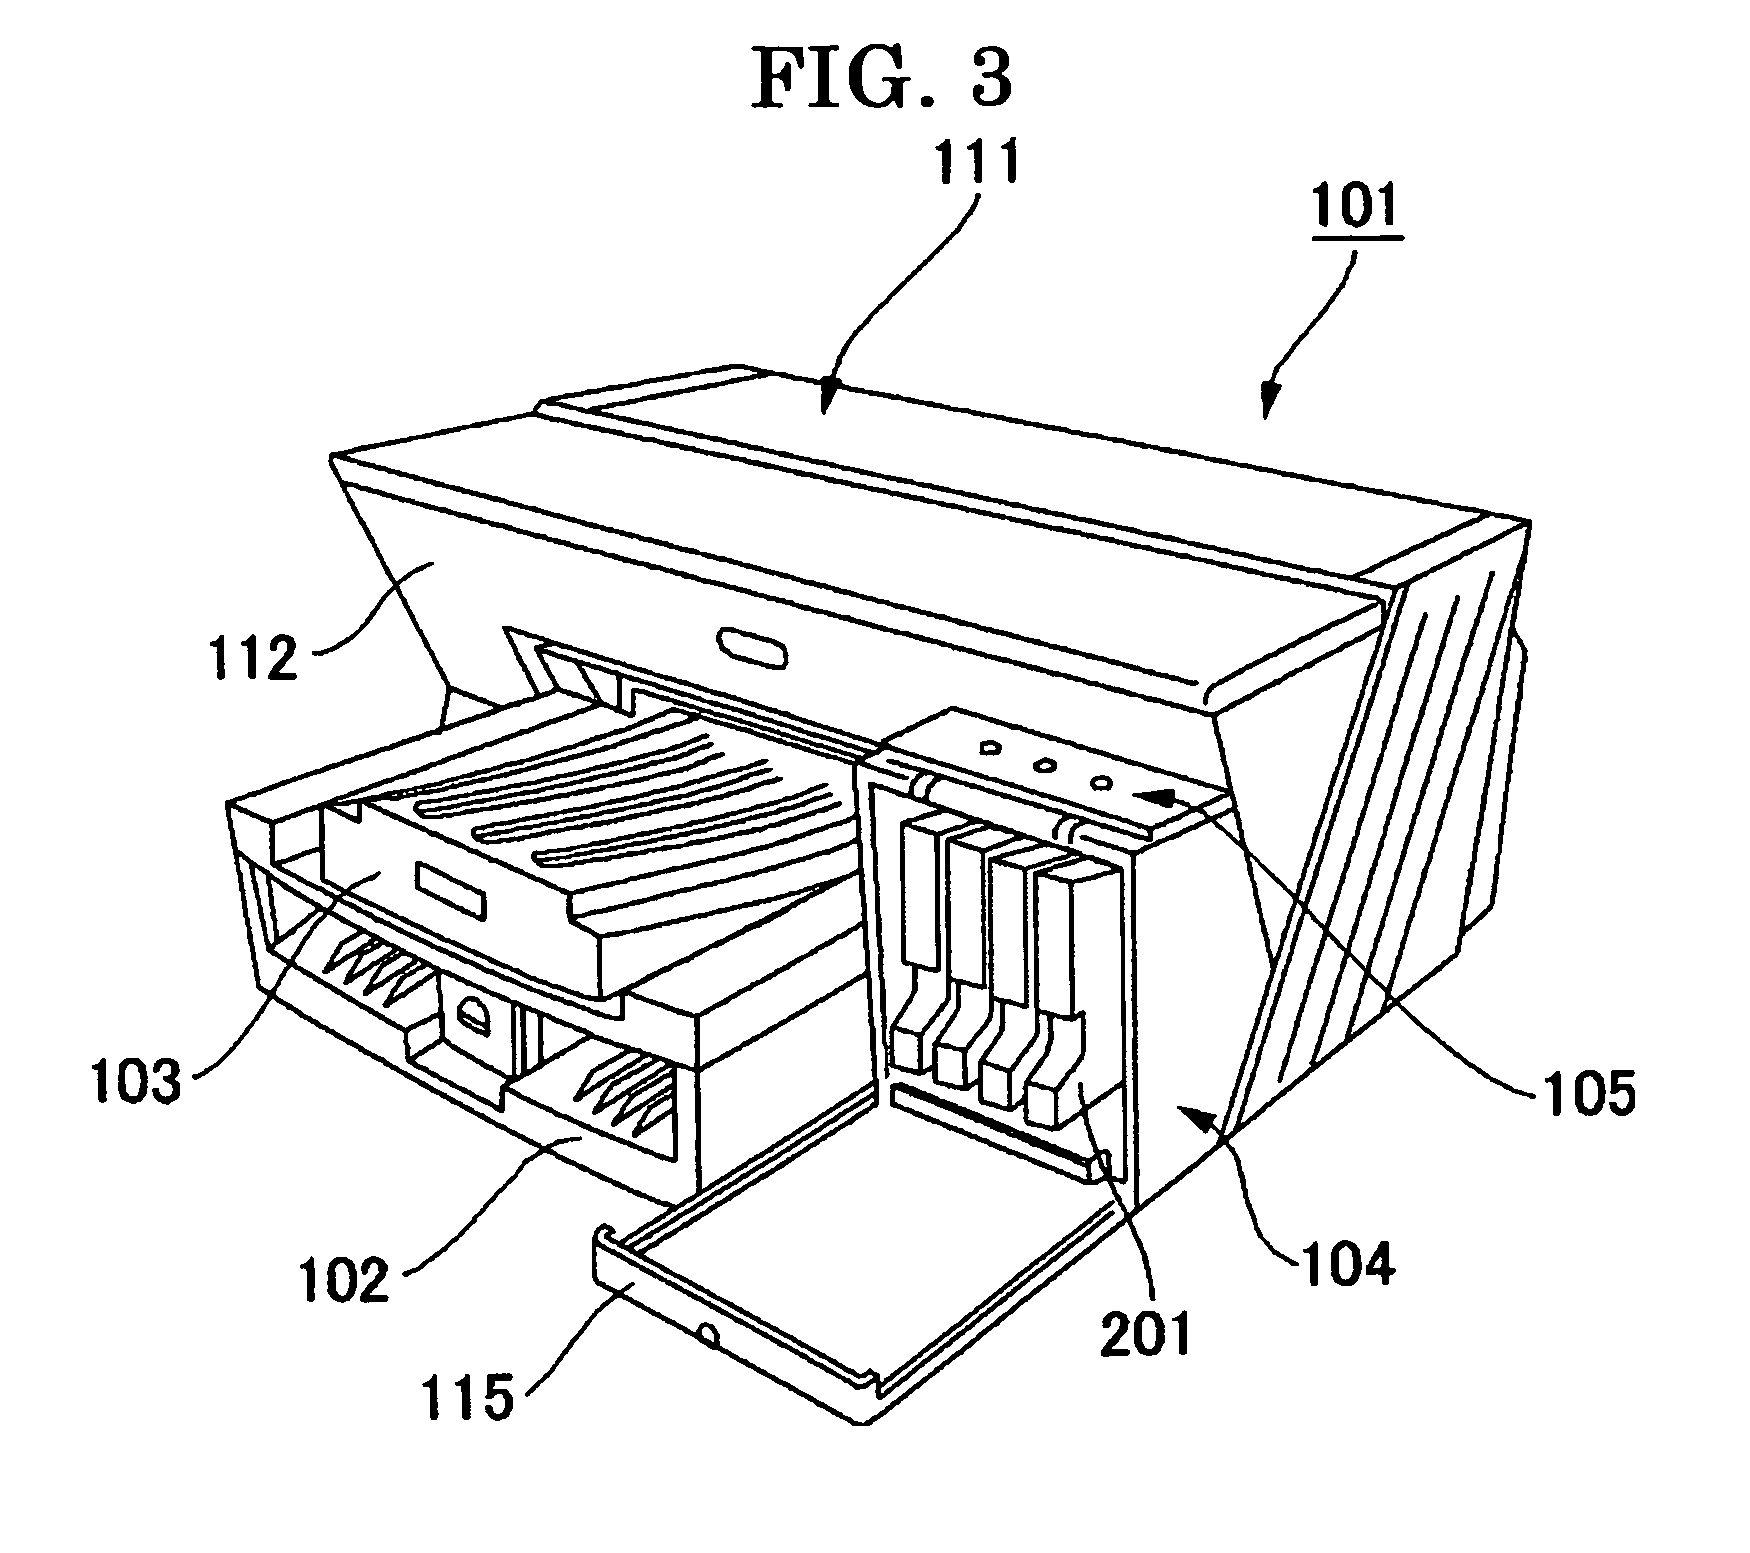 Ink-jet recording method, ink-jet recording apparatus and recorded matter